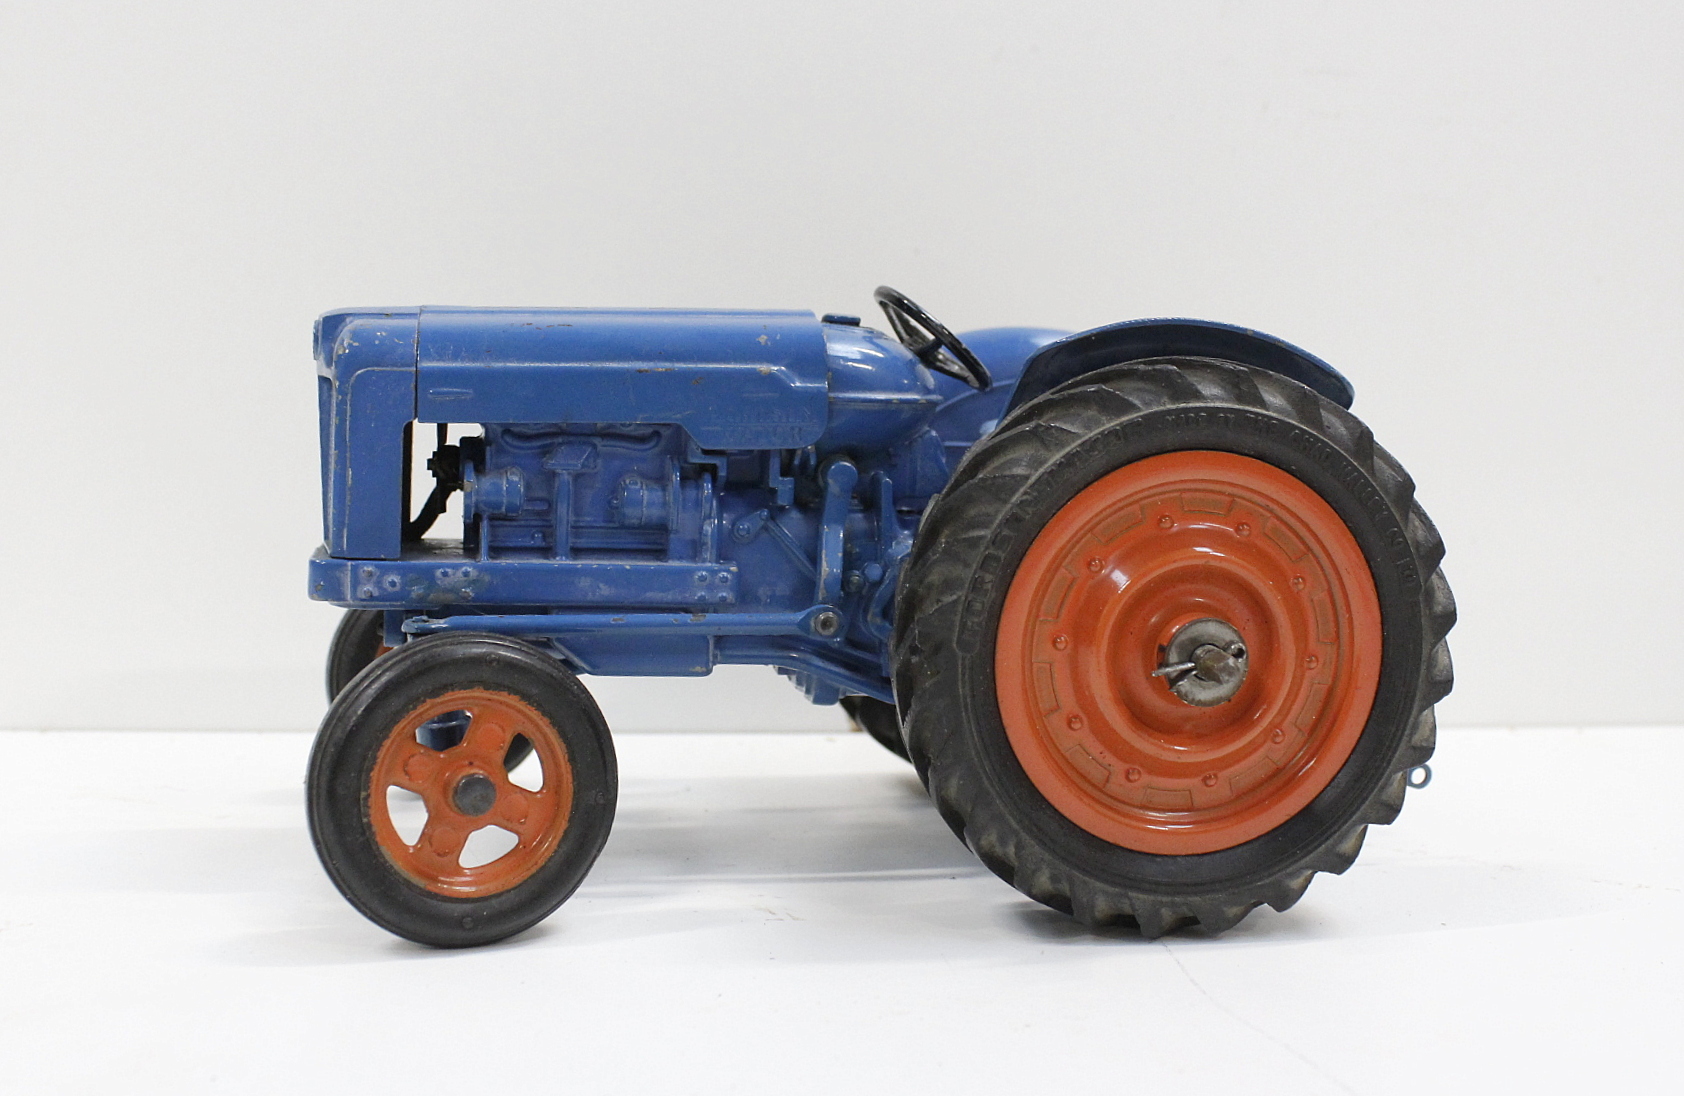 Chad Valley diecast model of a Forsdon Major tractor, blue with orange hubs - Image 2 of 3